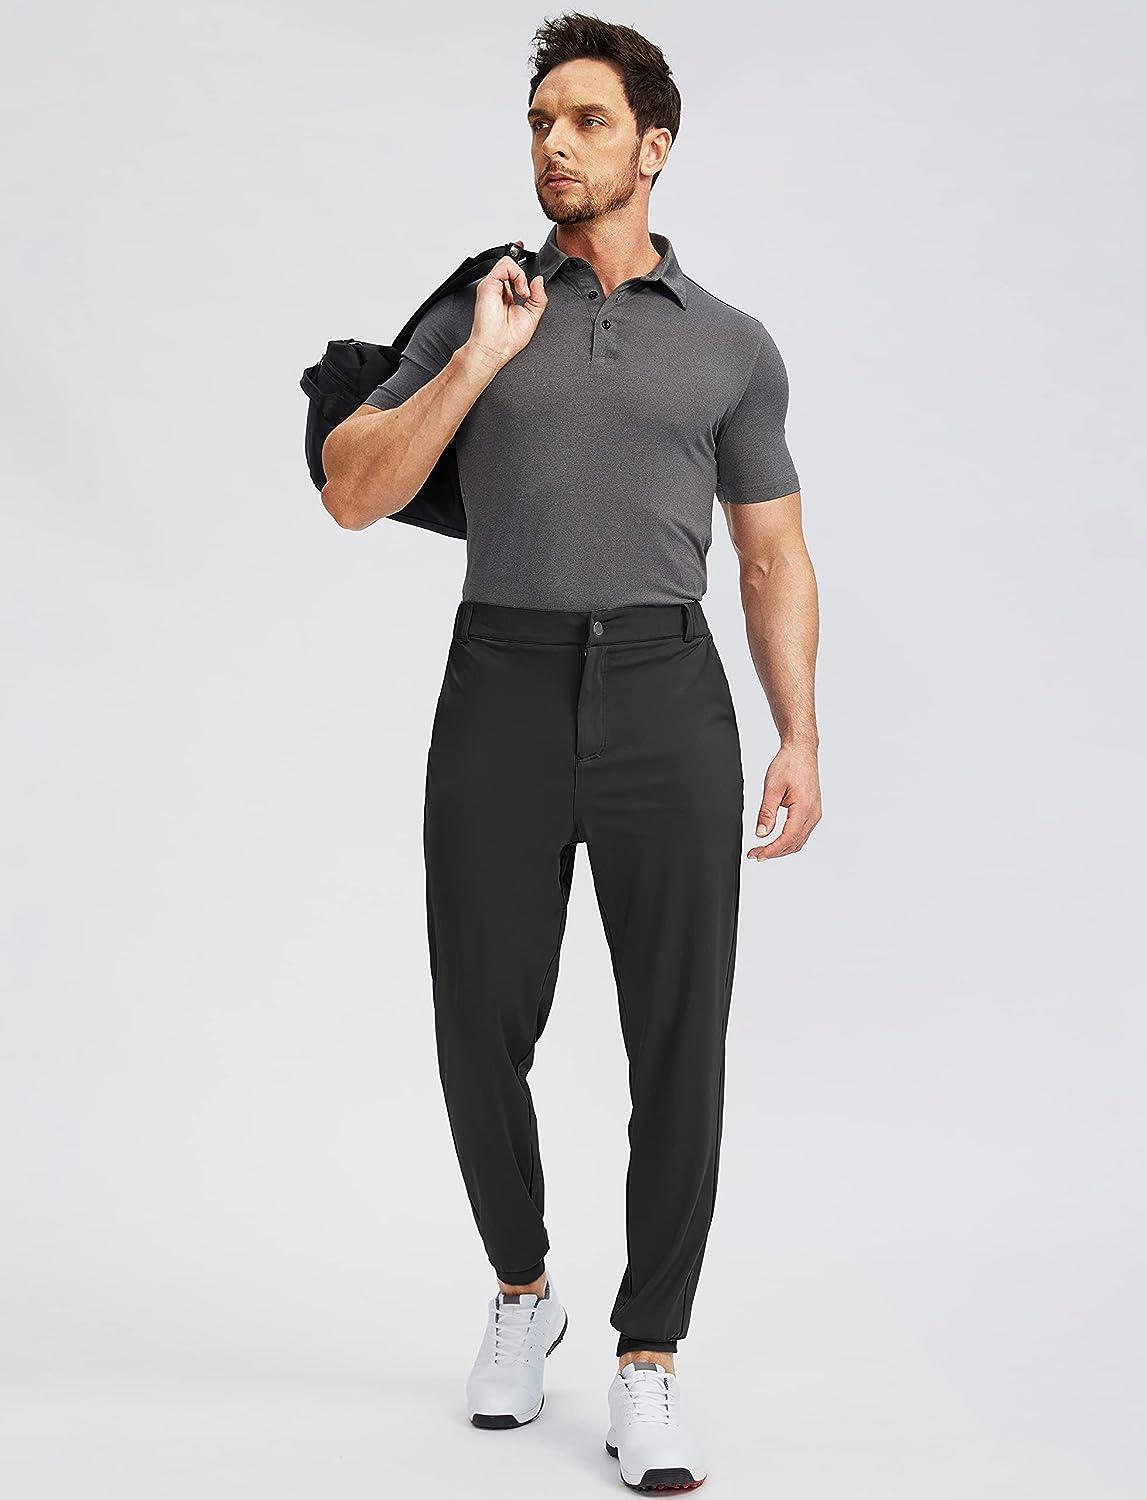 Soothfeel Men's Golf Joggers Pants with 5 Pockets Slim Fit Stretch  Sweatpants Running Travel Dress Work Pants for Men 01-black Large